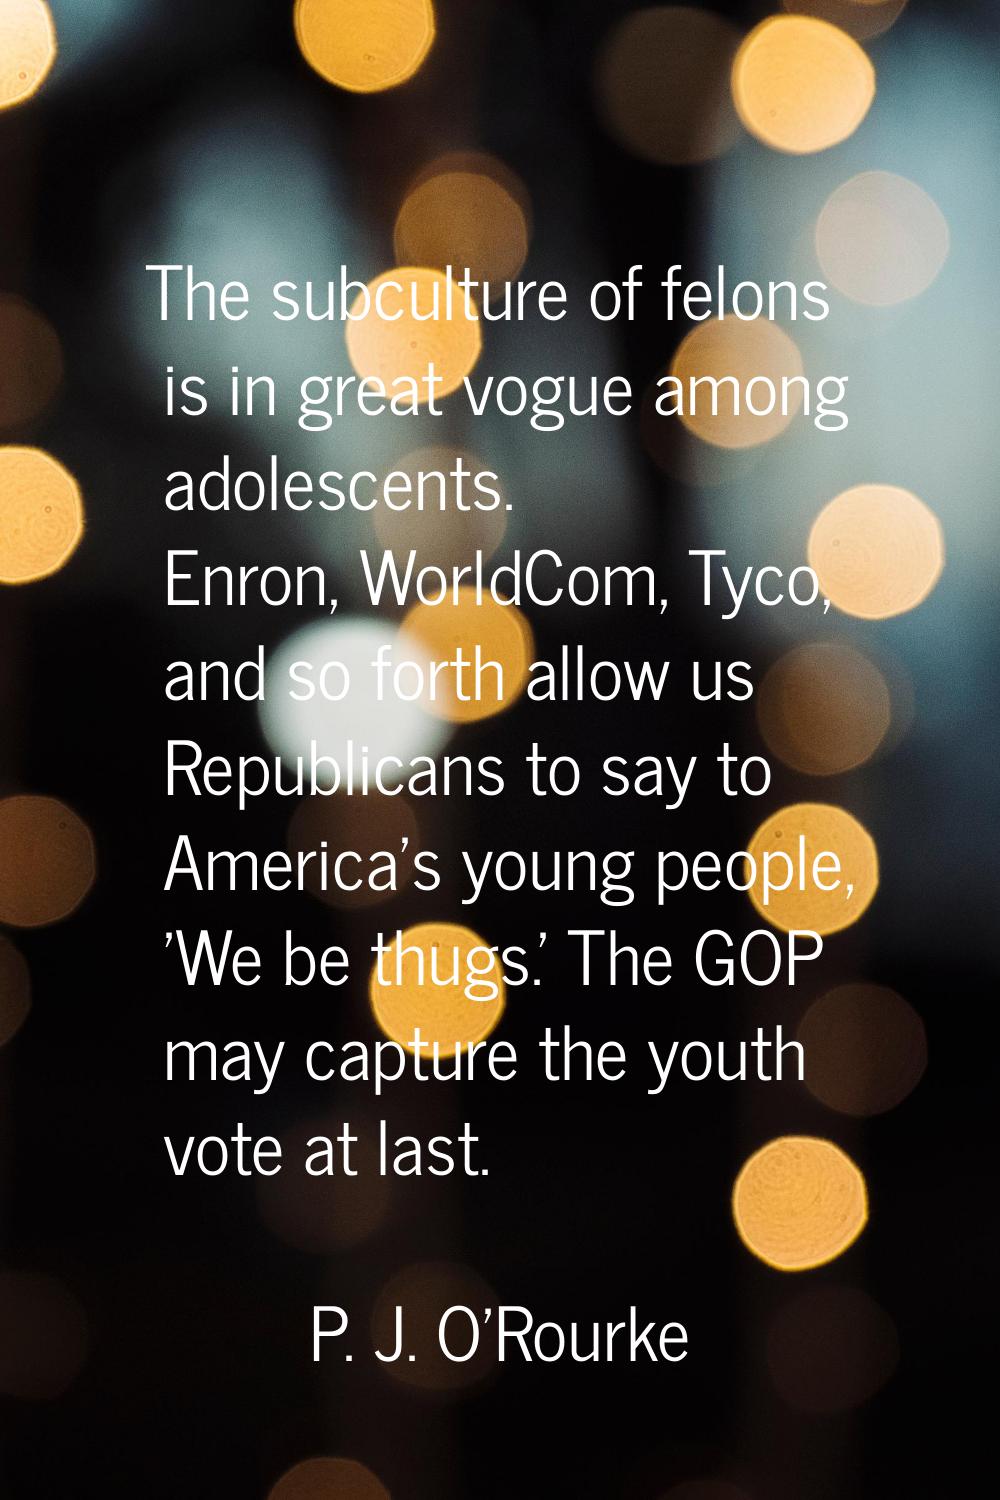 The subculture of felons is in great vogue among adolescents. Enron, WorldCom, Tyco, and so forth a